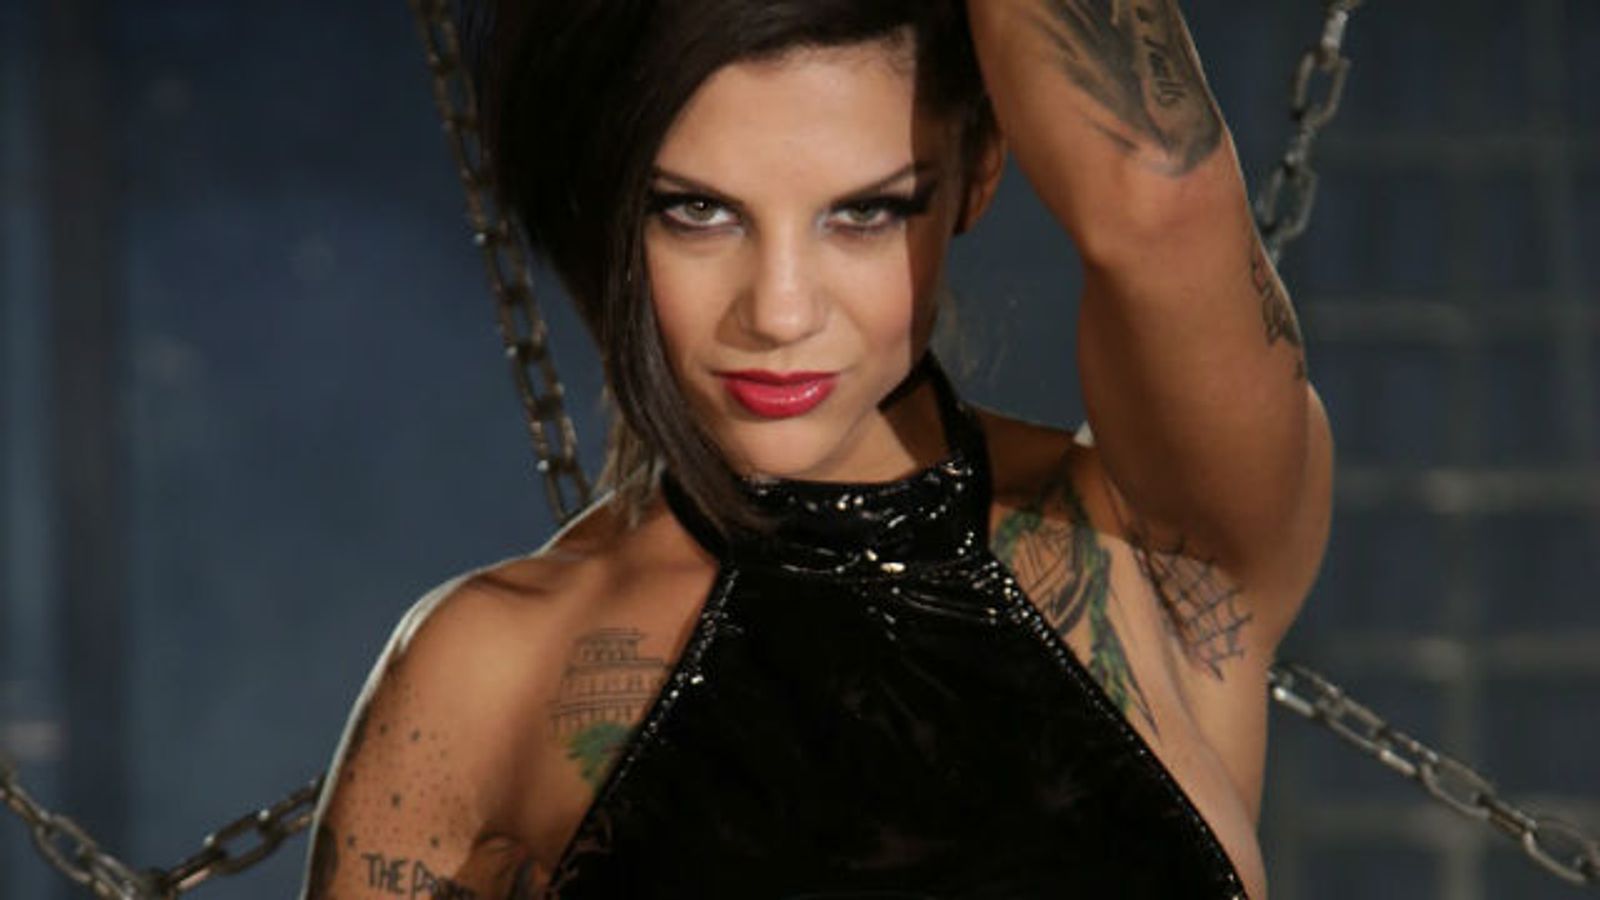 Bonnie Rotten is Nightmoves 2014 Best New Performer